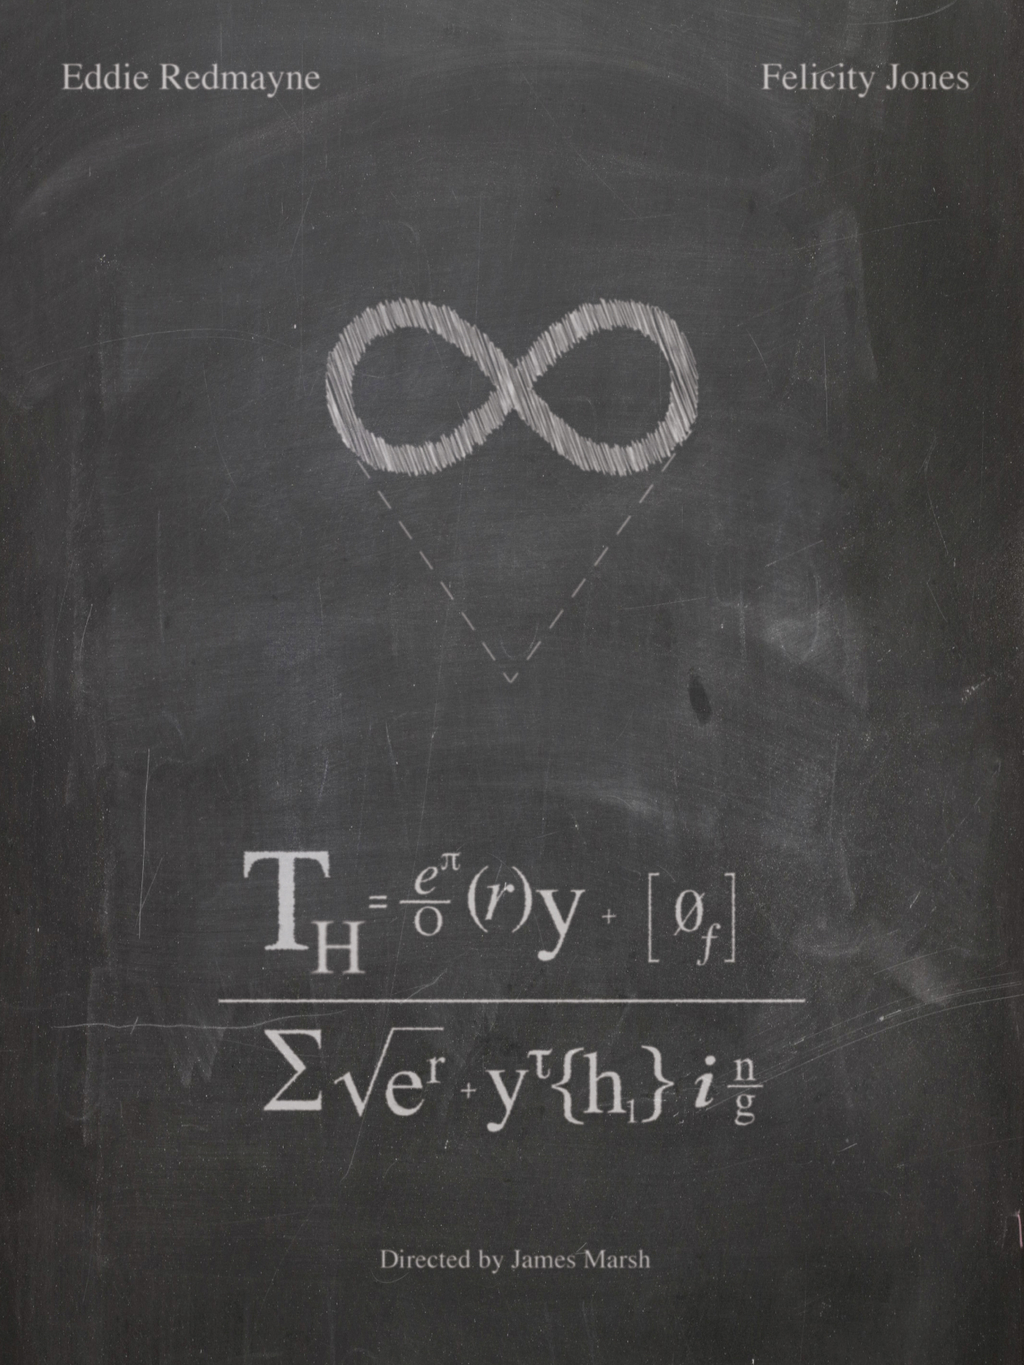 theory of everything minimalist poster - Eddie Redmayne Felicity Jones Themy 0 Every'{h}i Directed by James Marsh